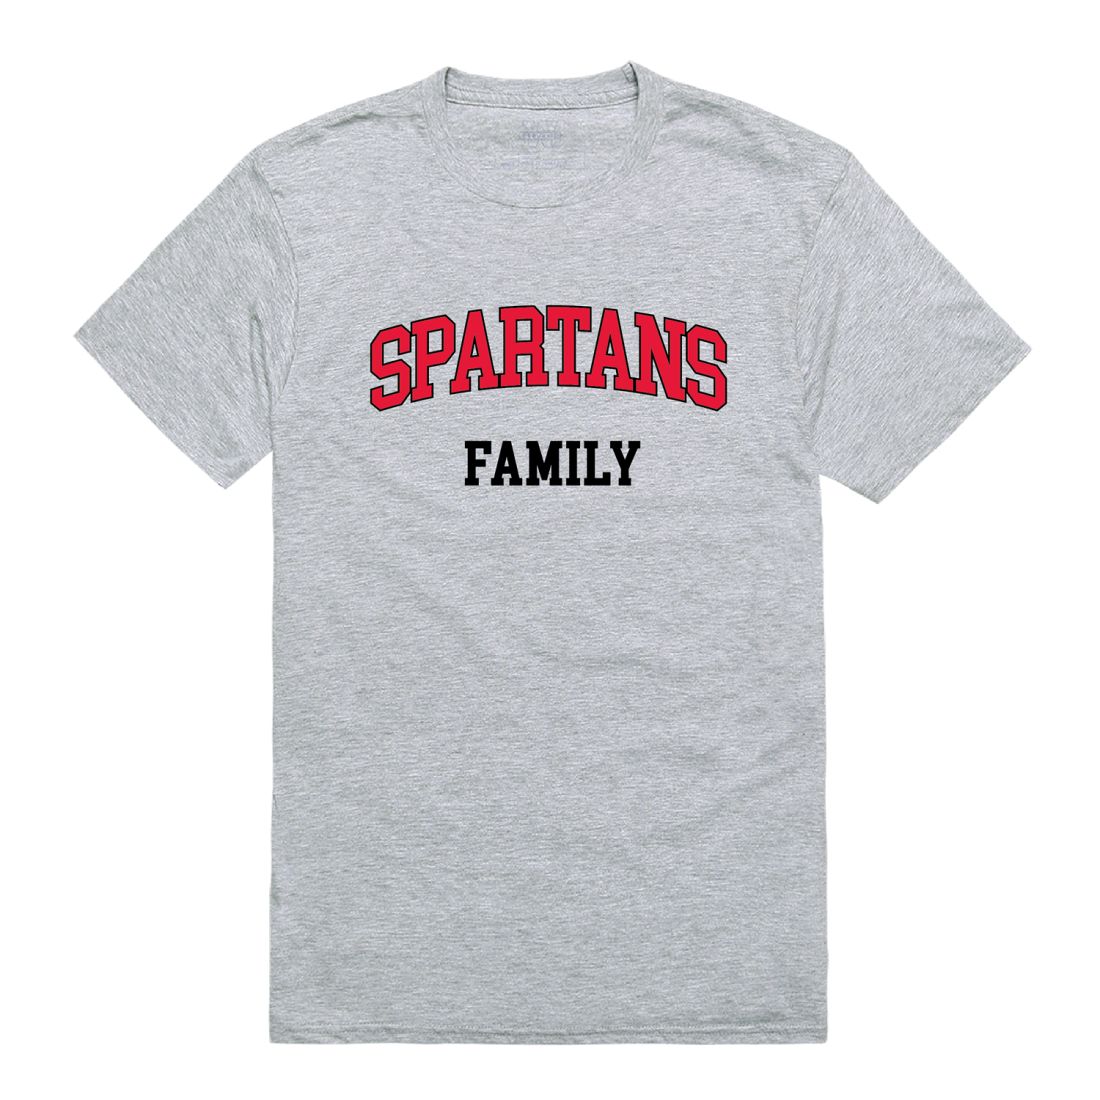 University of Tampa Spartans Family T-Shirt